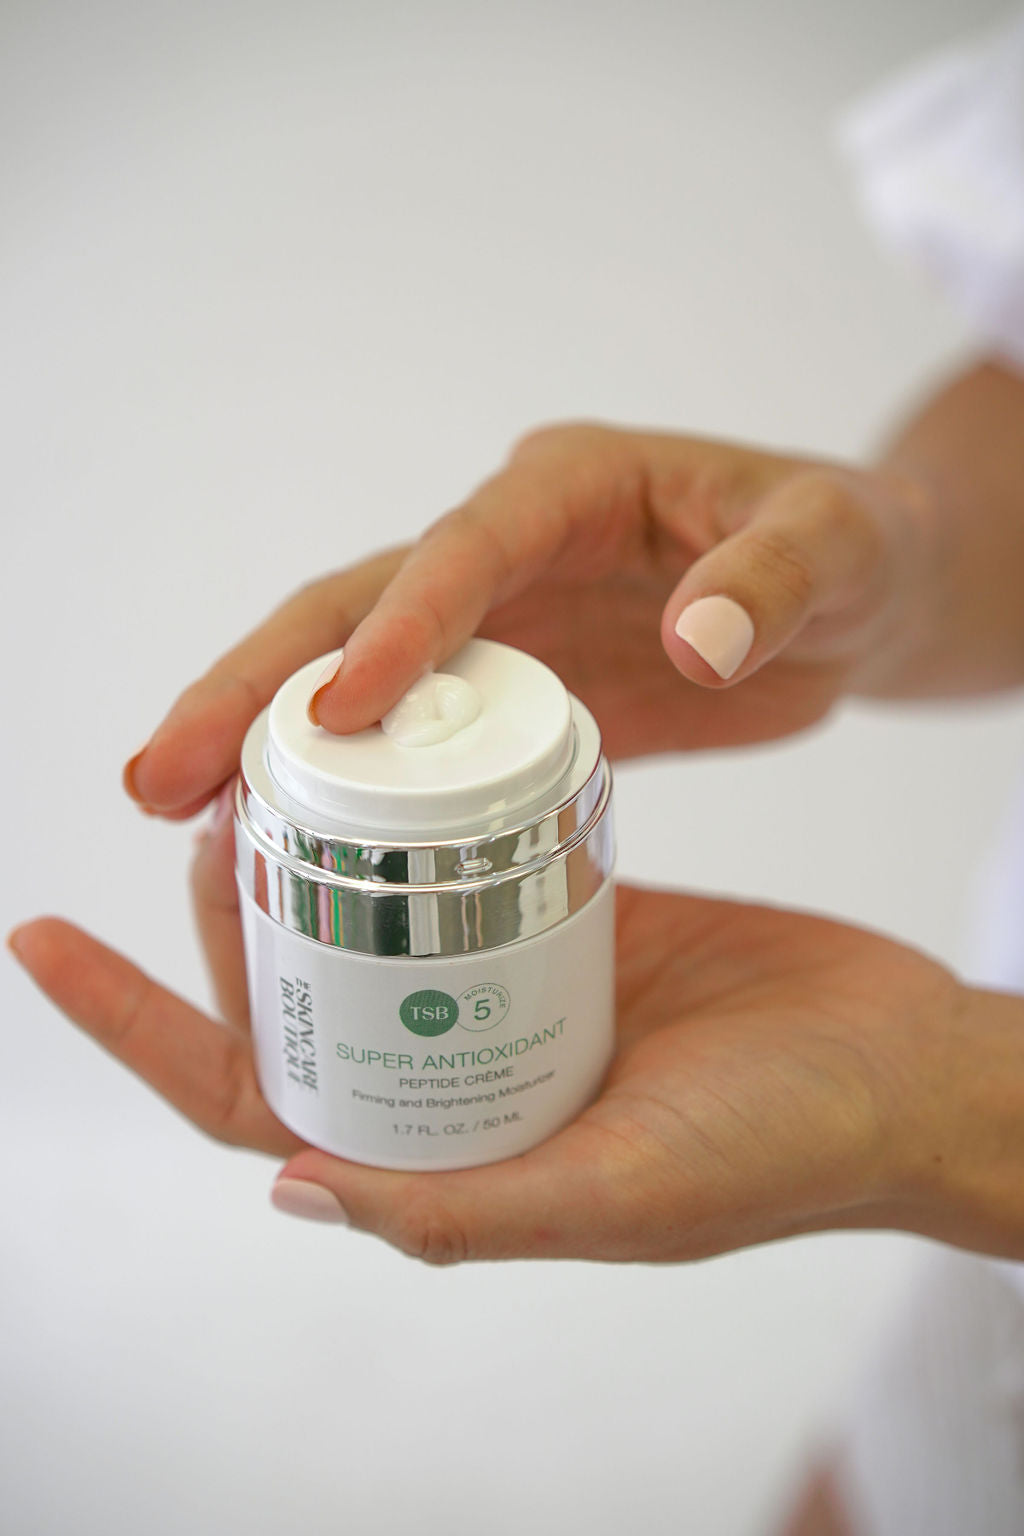 SUPER ANTIOXIDANT PEPTIDE CREME BEING USED